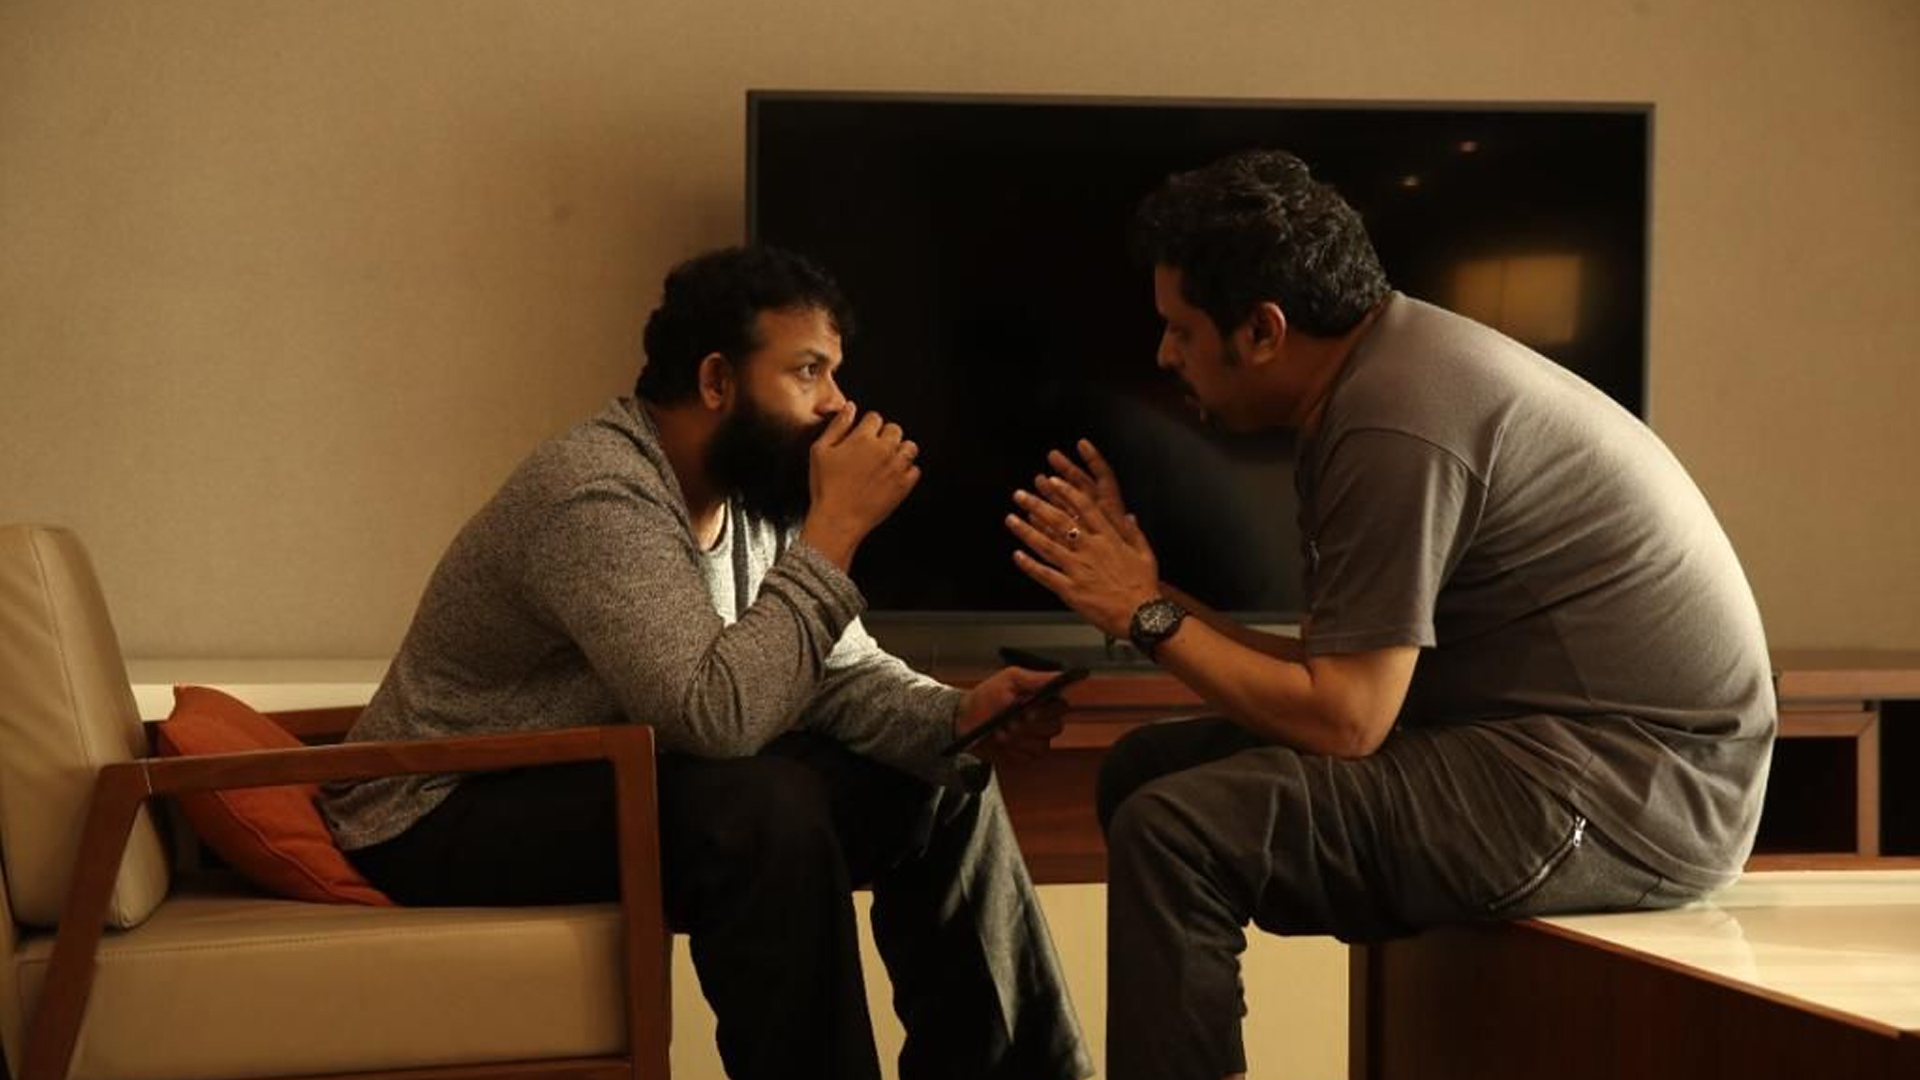 Dream team of Jayasurya and Ranjith Sankar are back once again to delight audiences in their upcoming Malayalam suspense drama Sunny on Amazon Prime Video